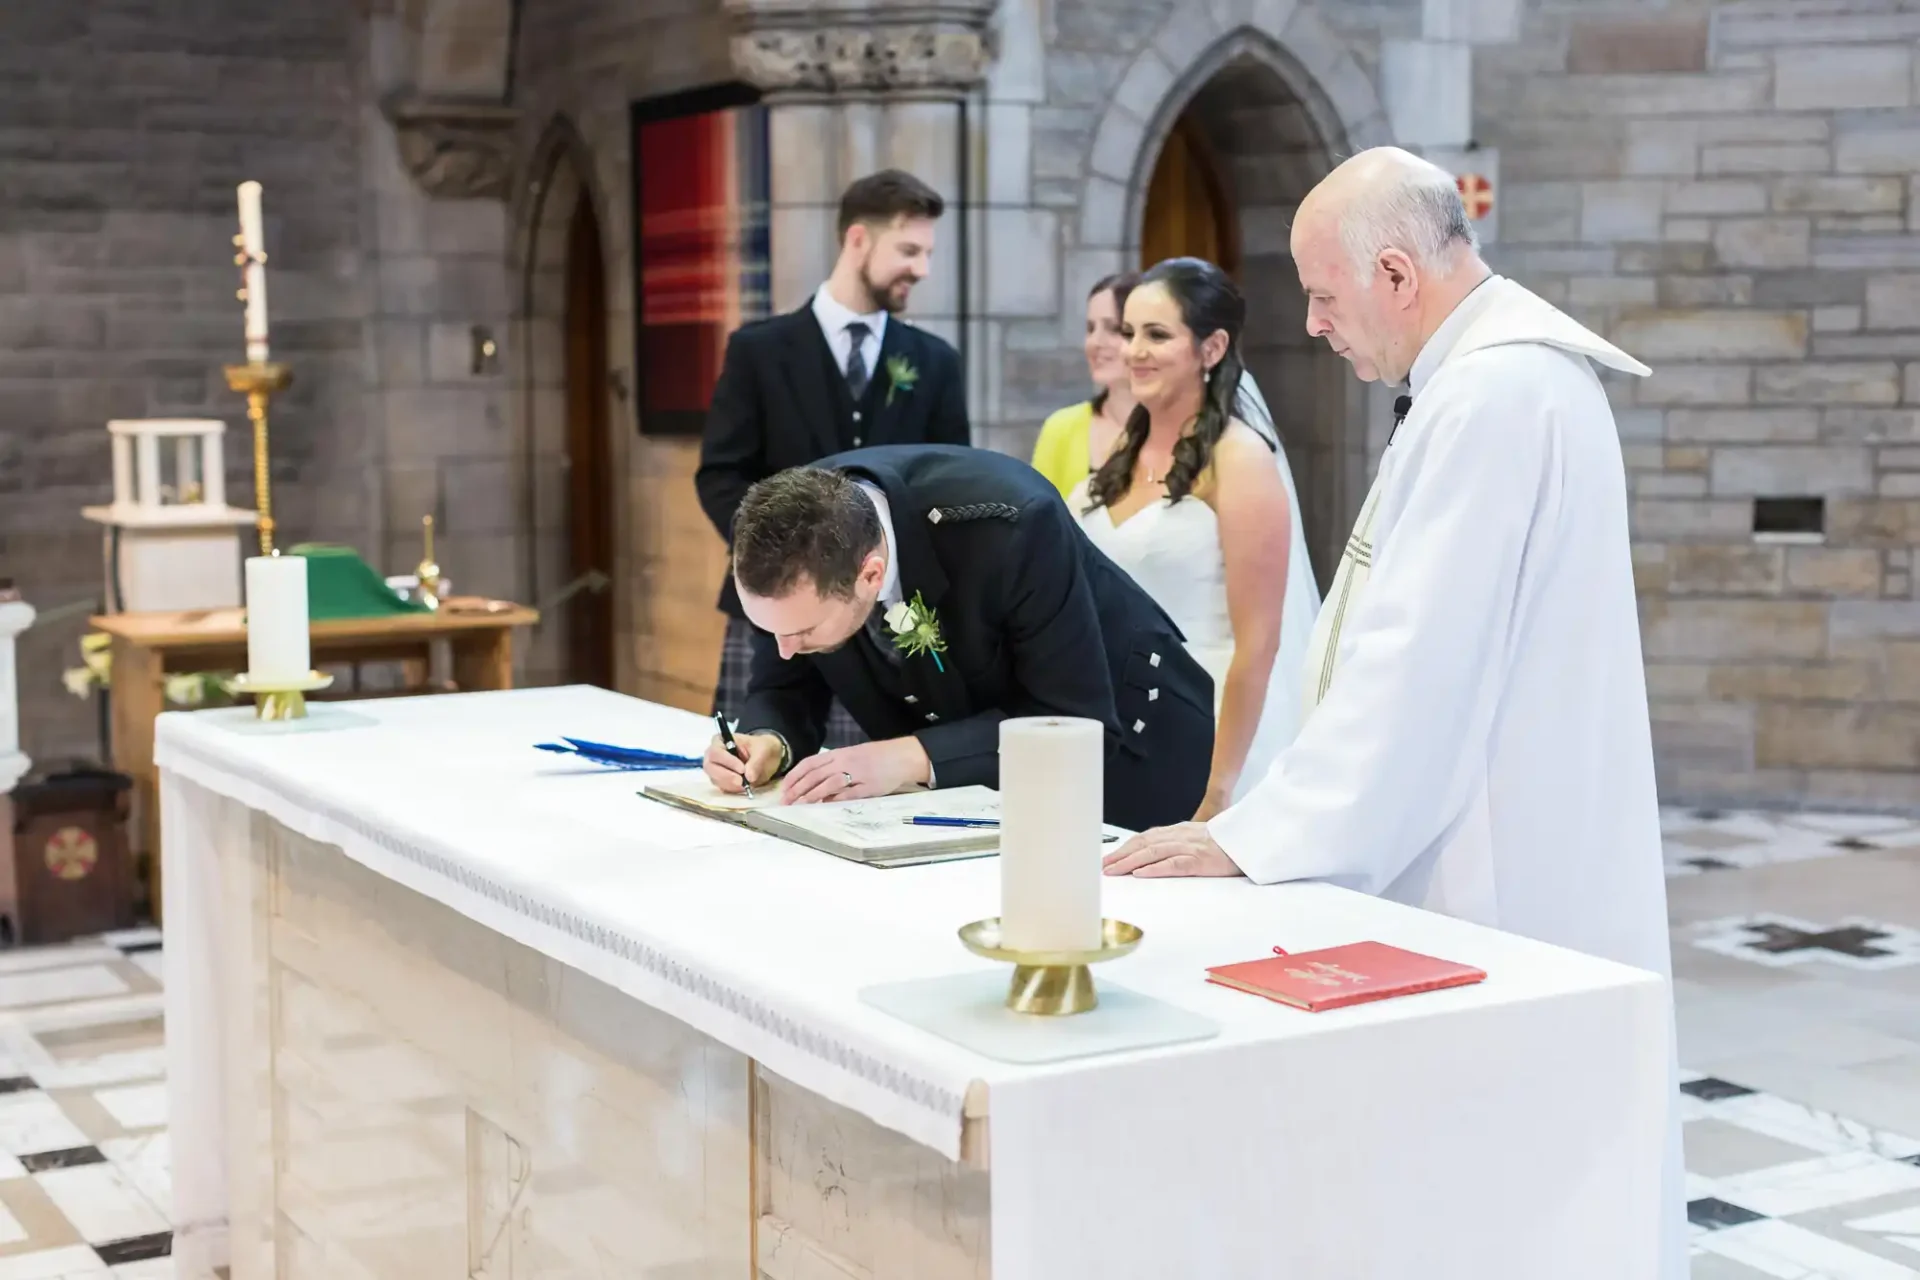 Groom signing the marriage register in a church, observed by a priest and bride, alongside a witness in the background.